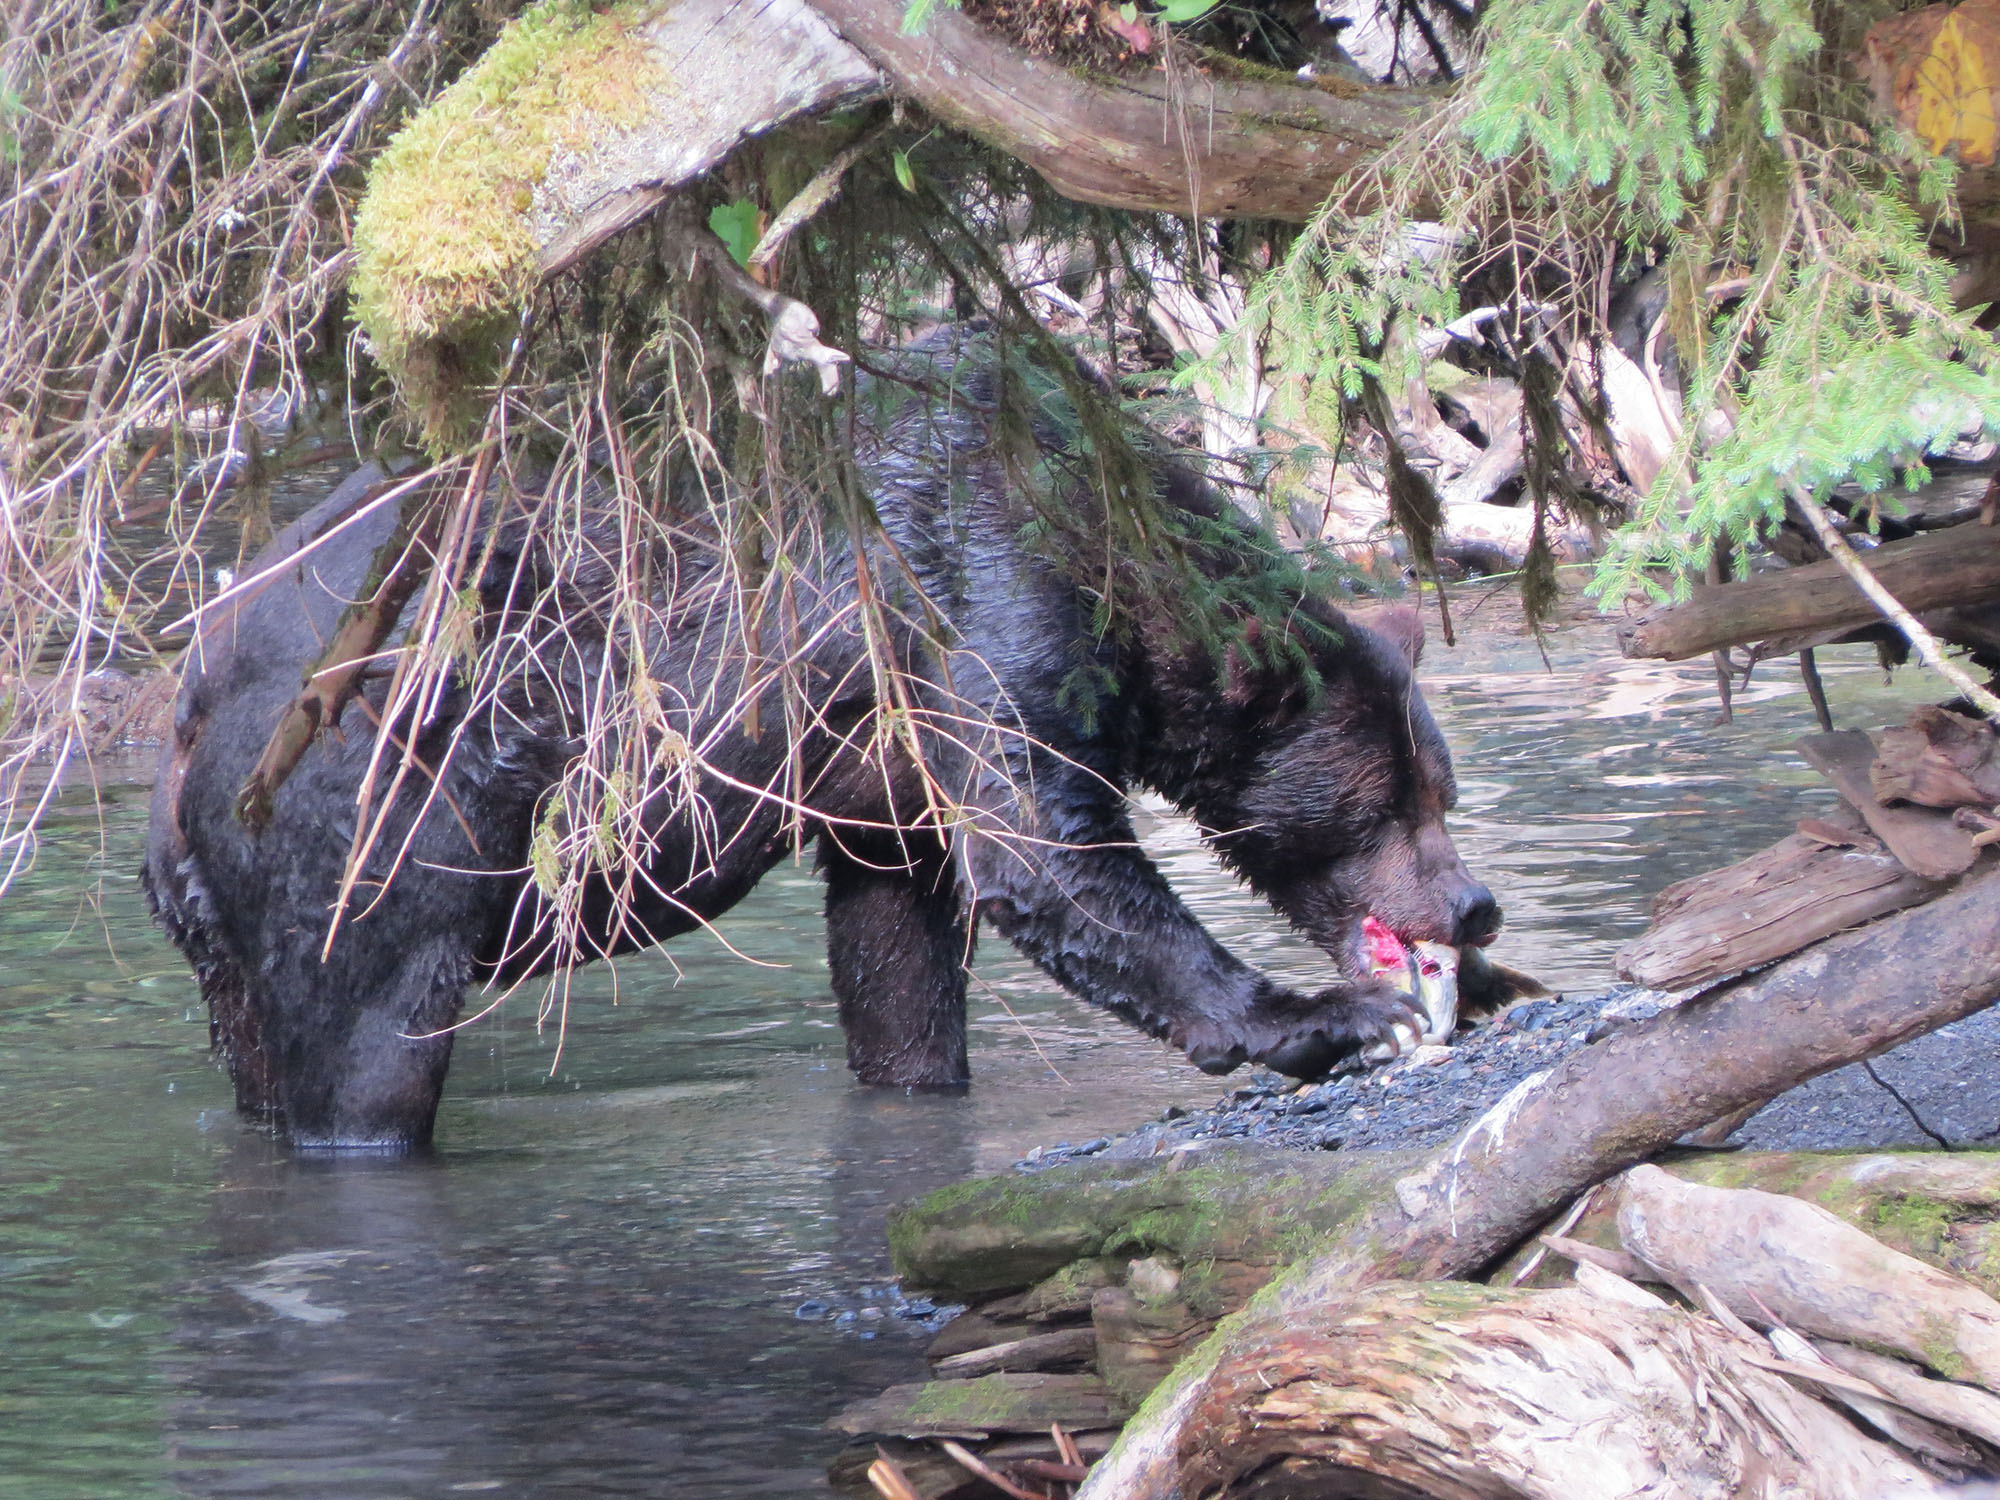 A brown bear in the Tongass.